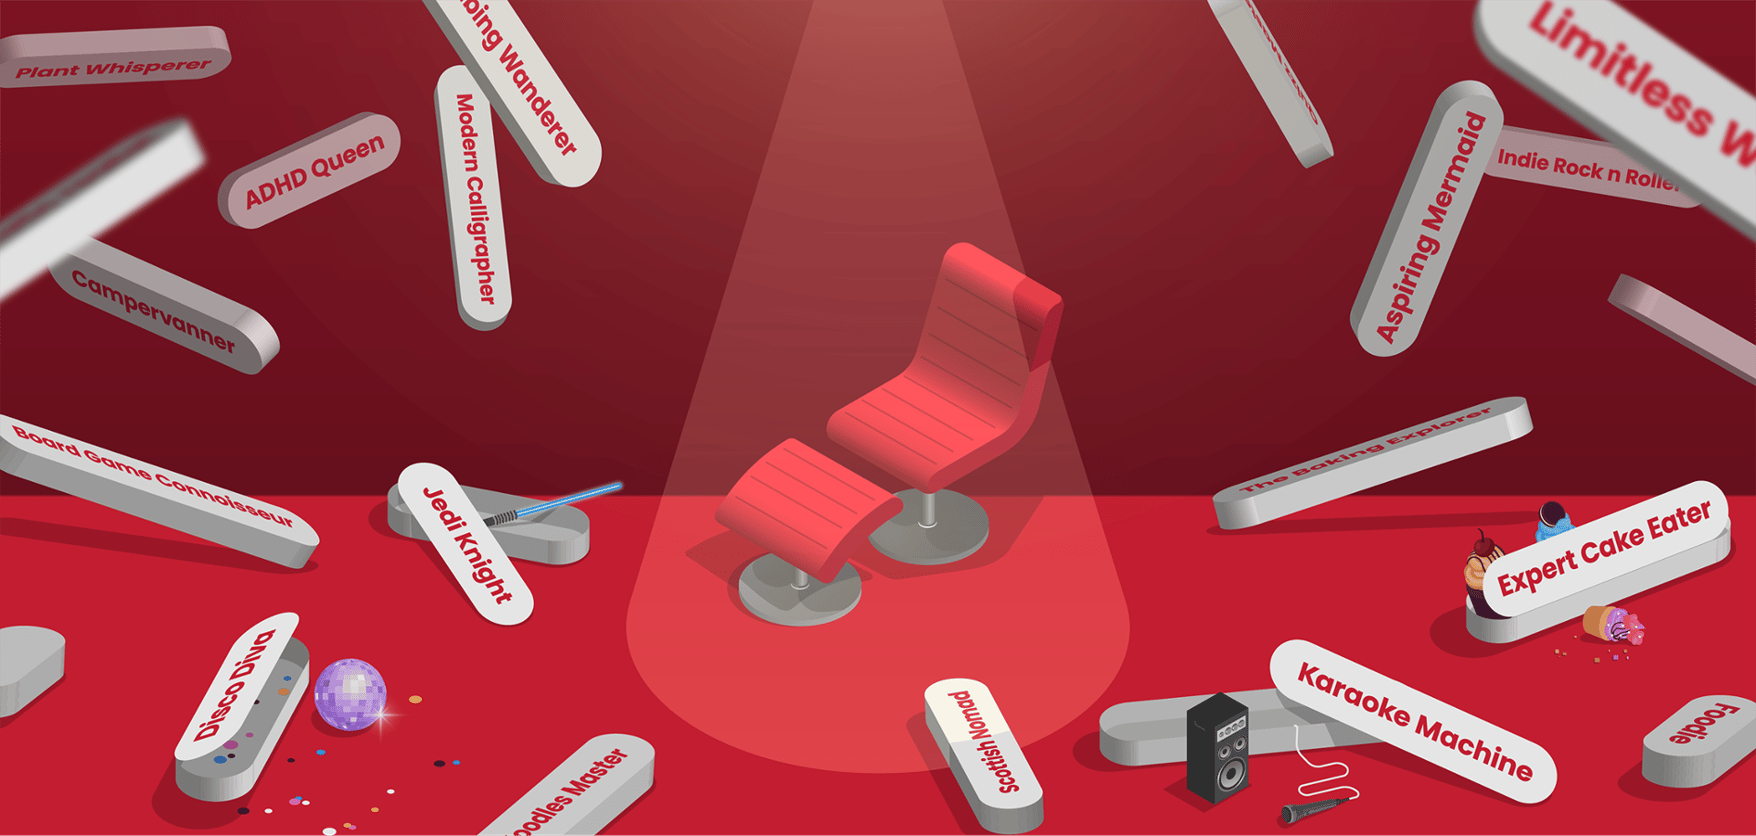 Red chair and AND Titles illustration